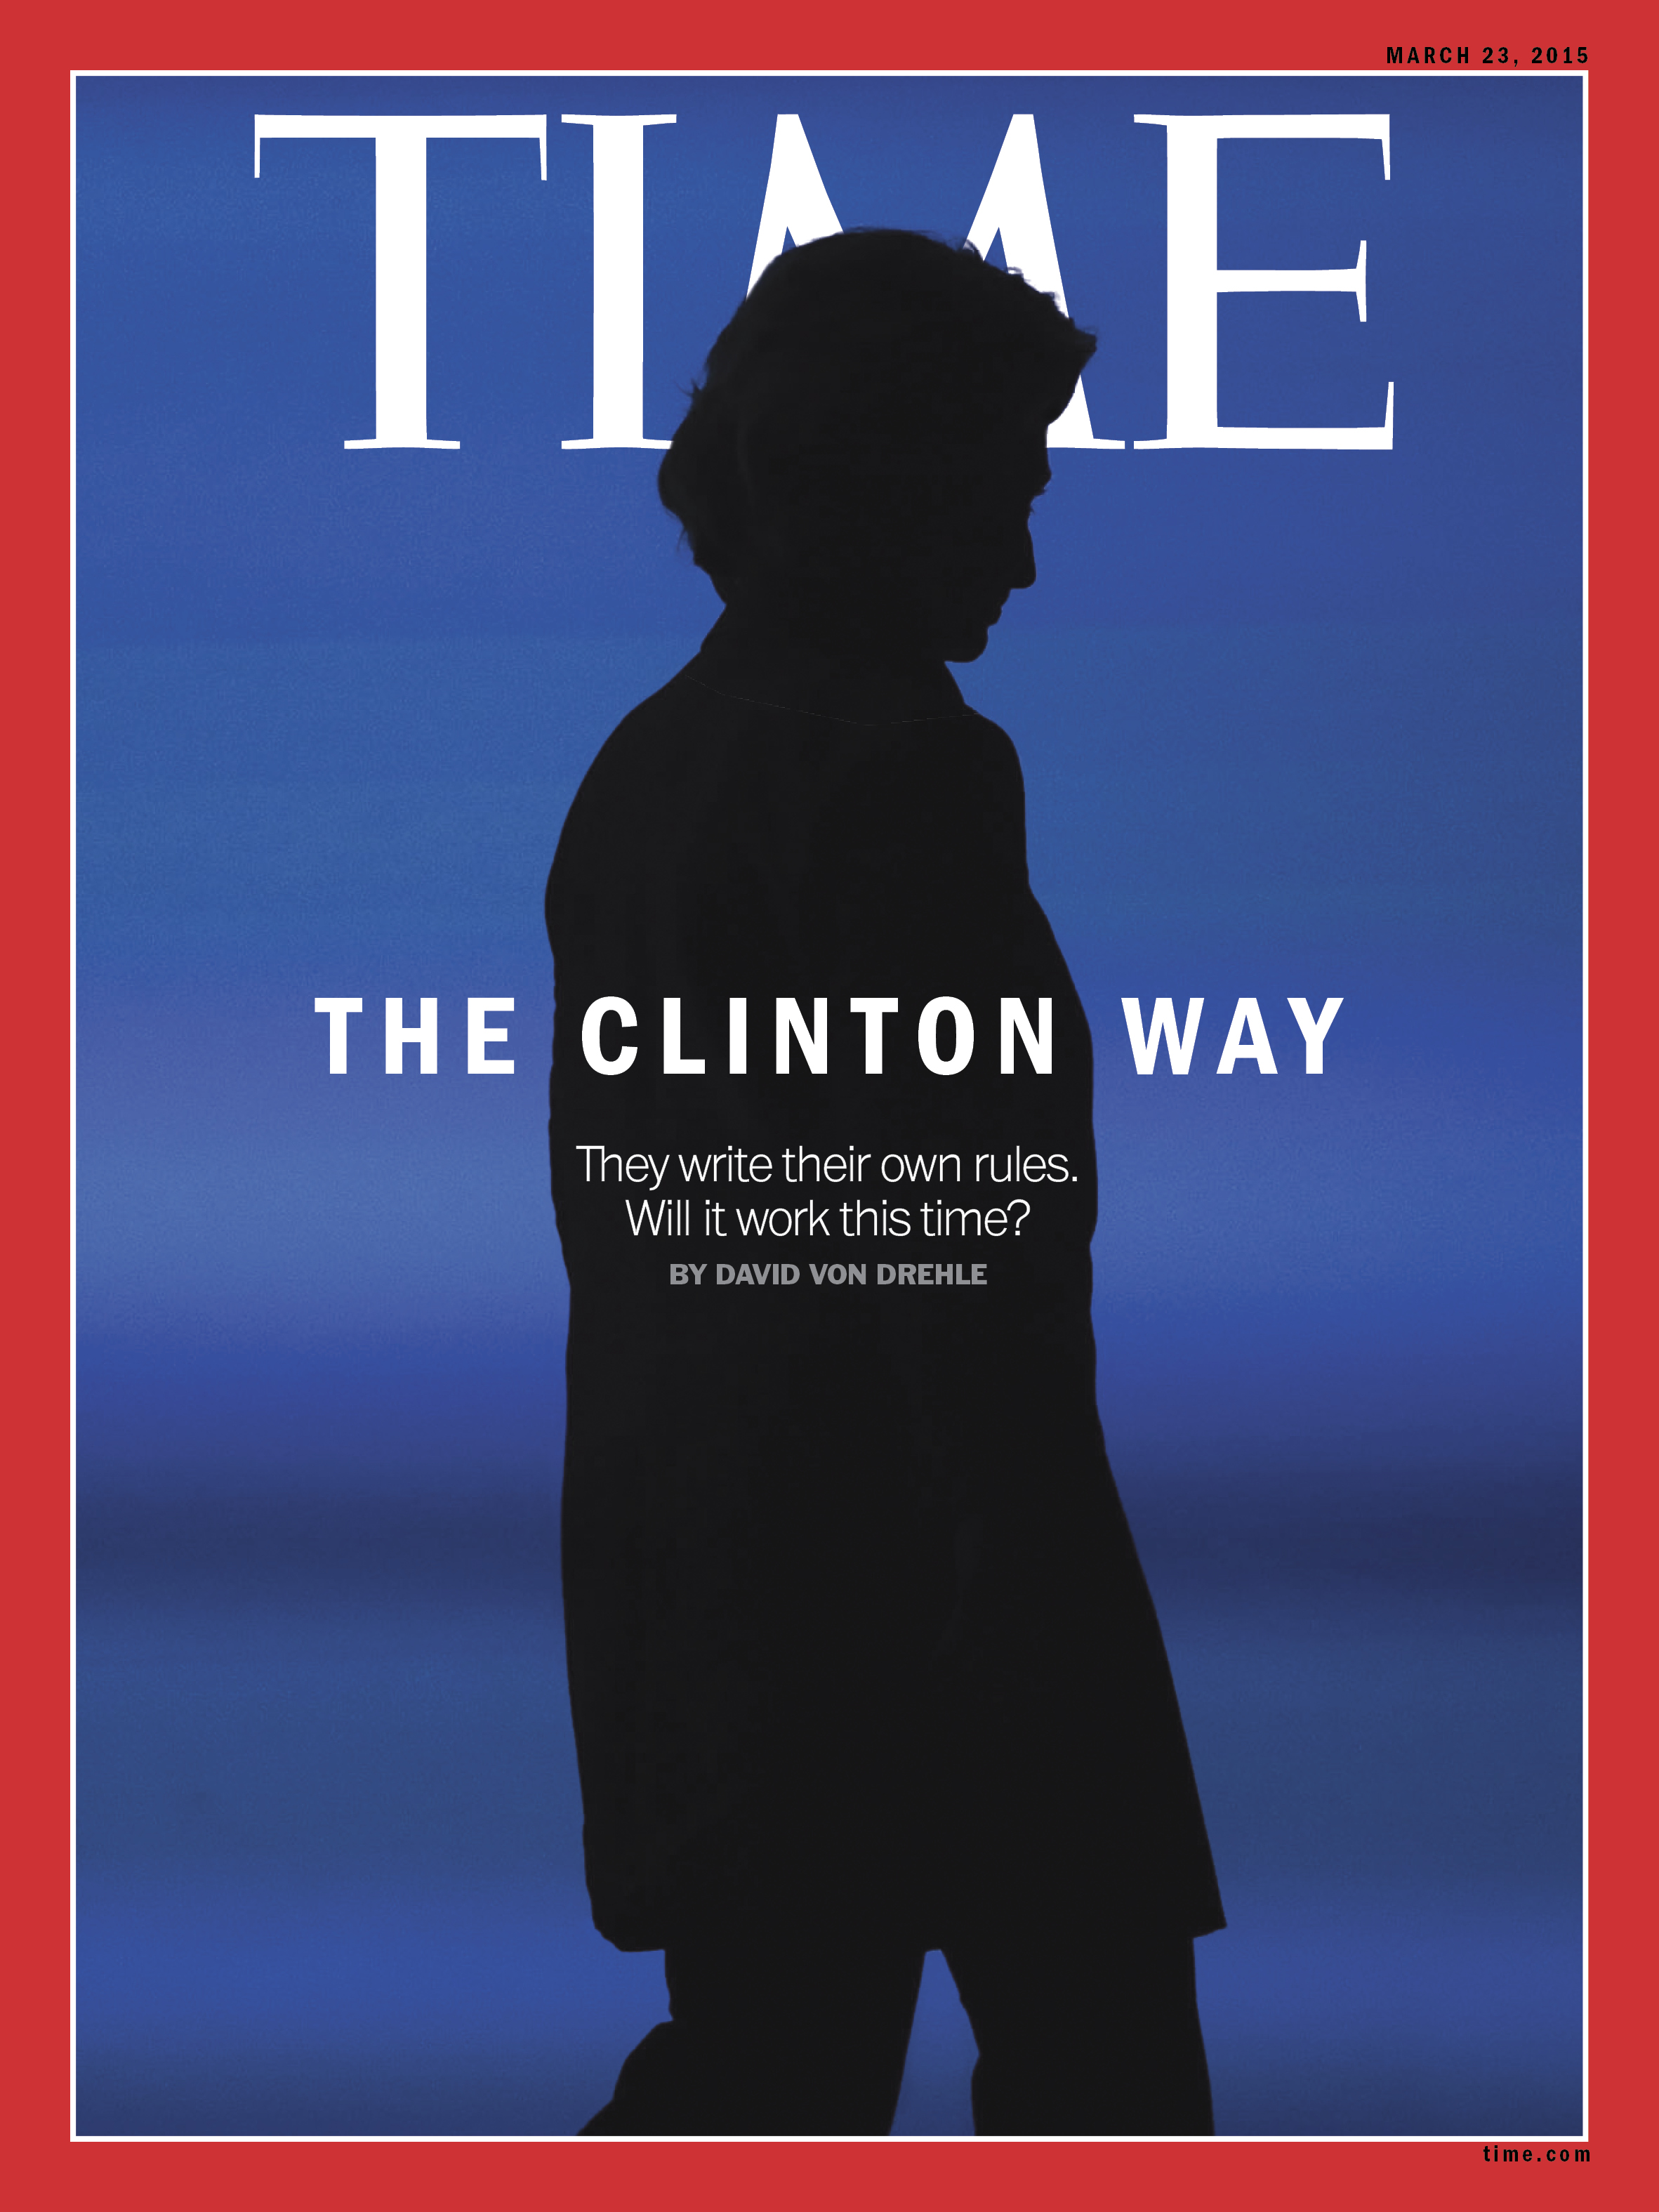 The Clinton Way | TIME